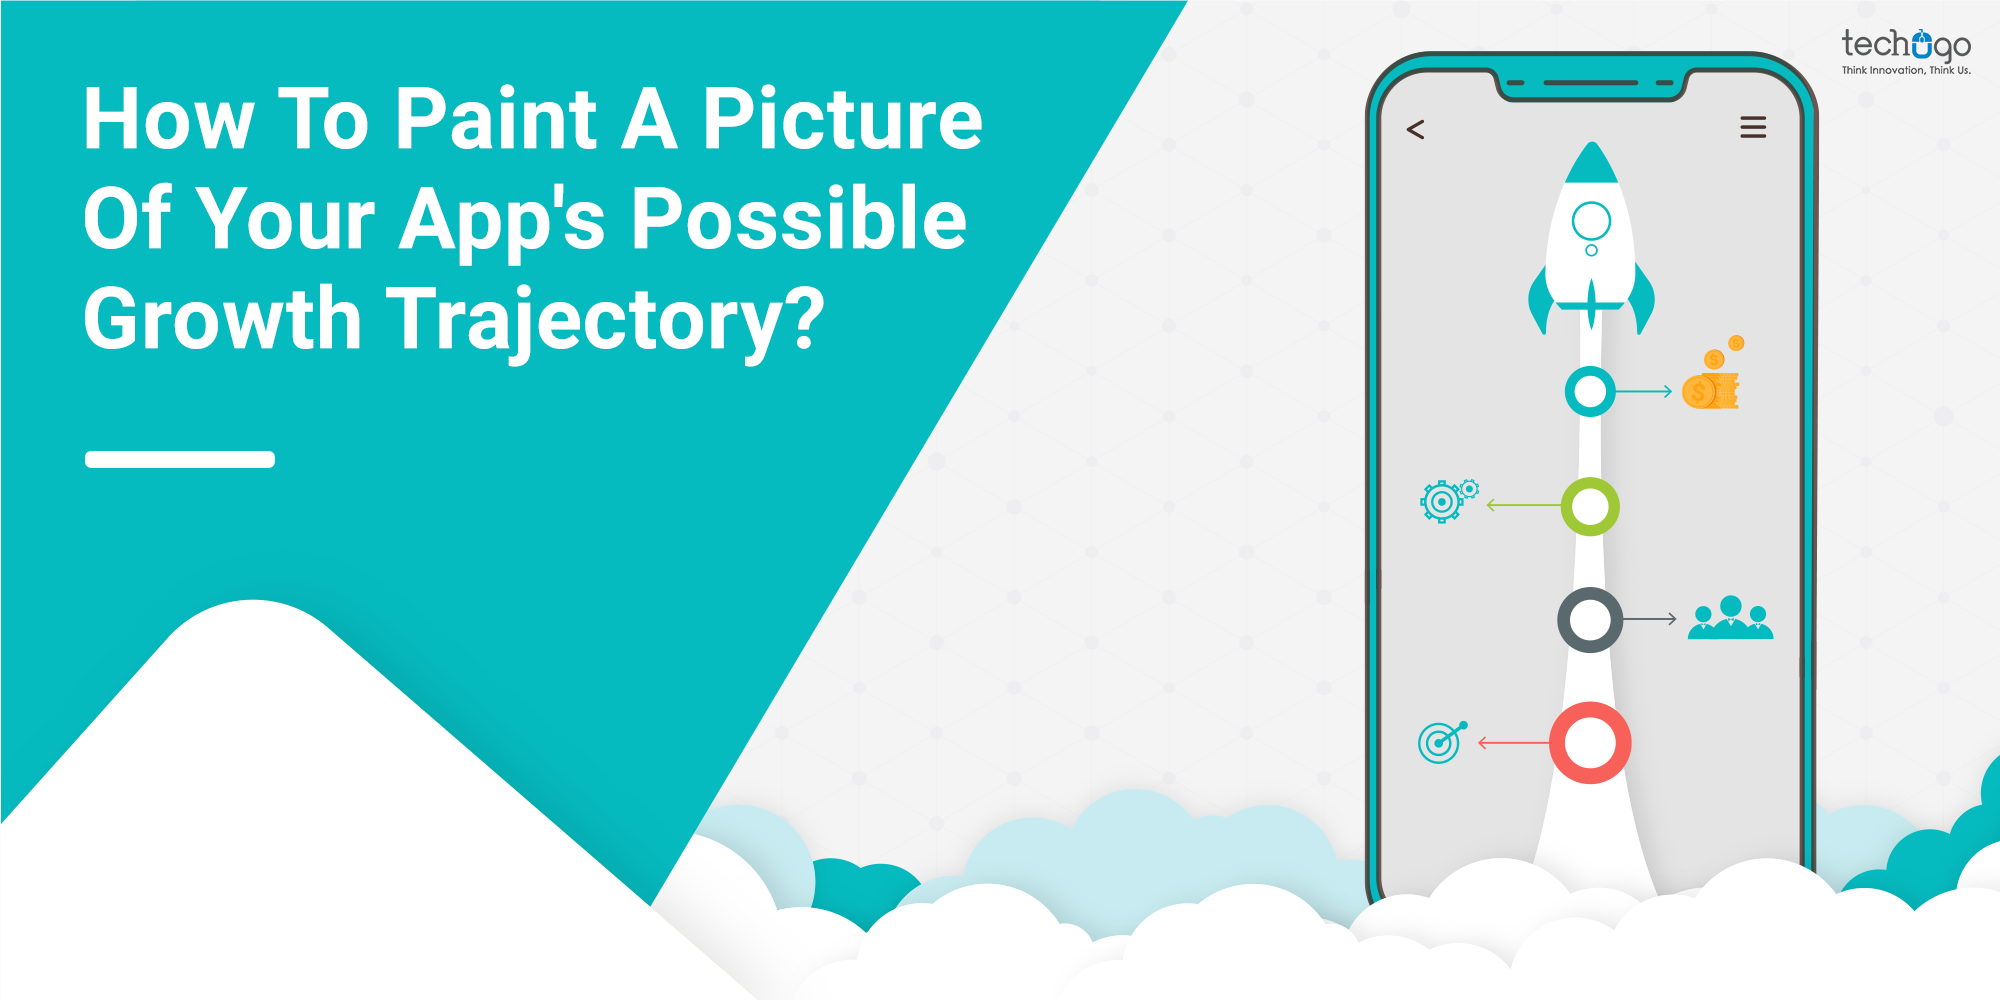 How To Paint A Picture Of Your App’s Possible Growth Trajectory?